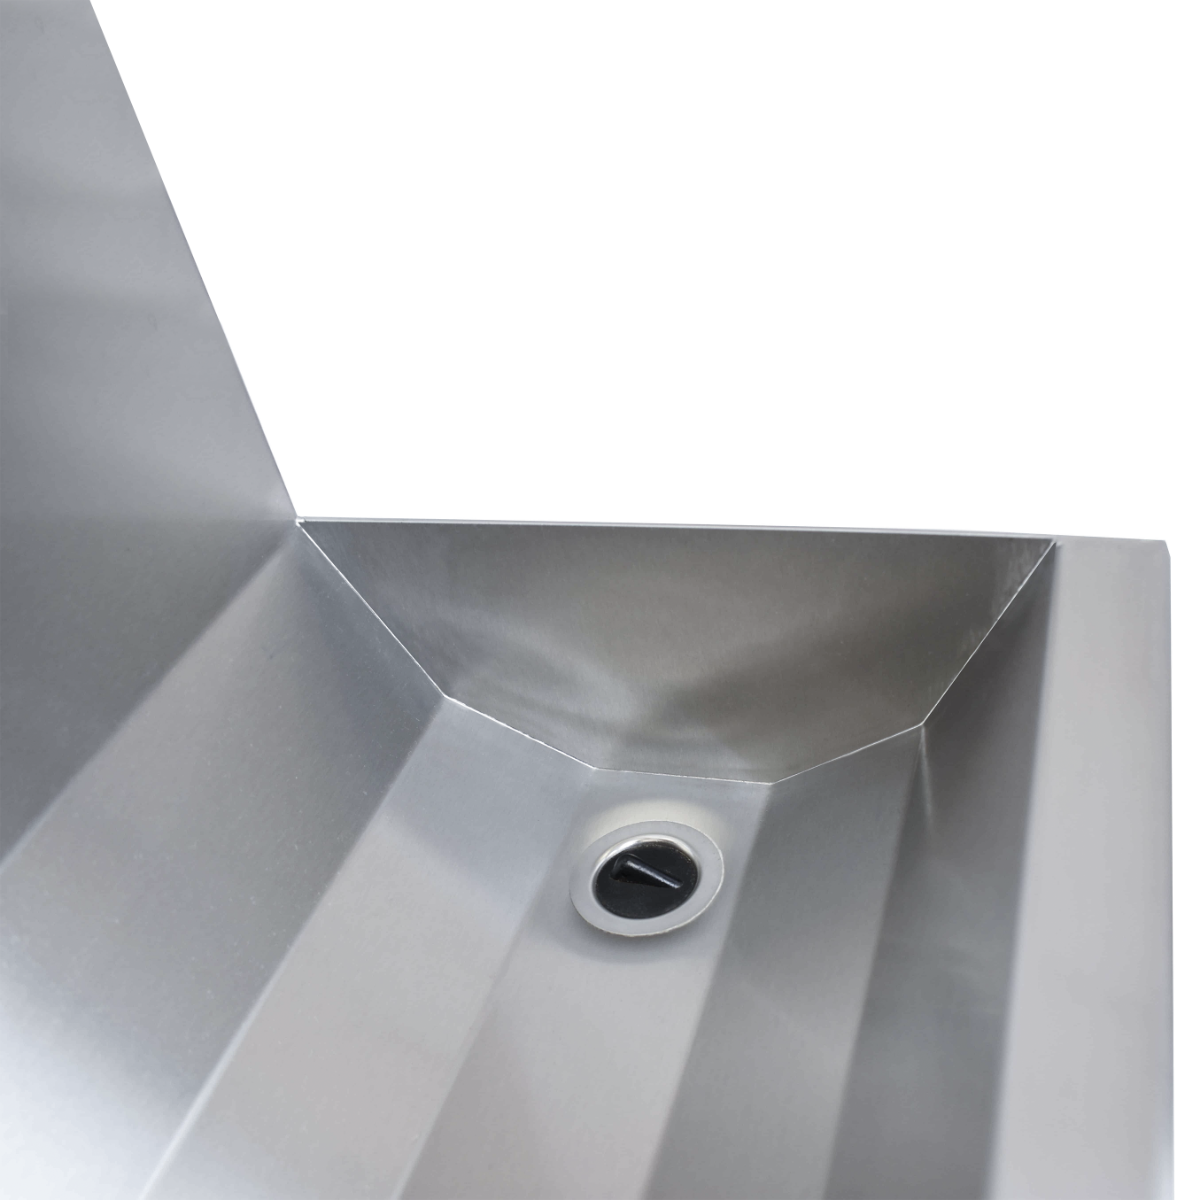 Stainless steel six station knee operated wash trough